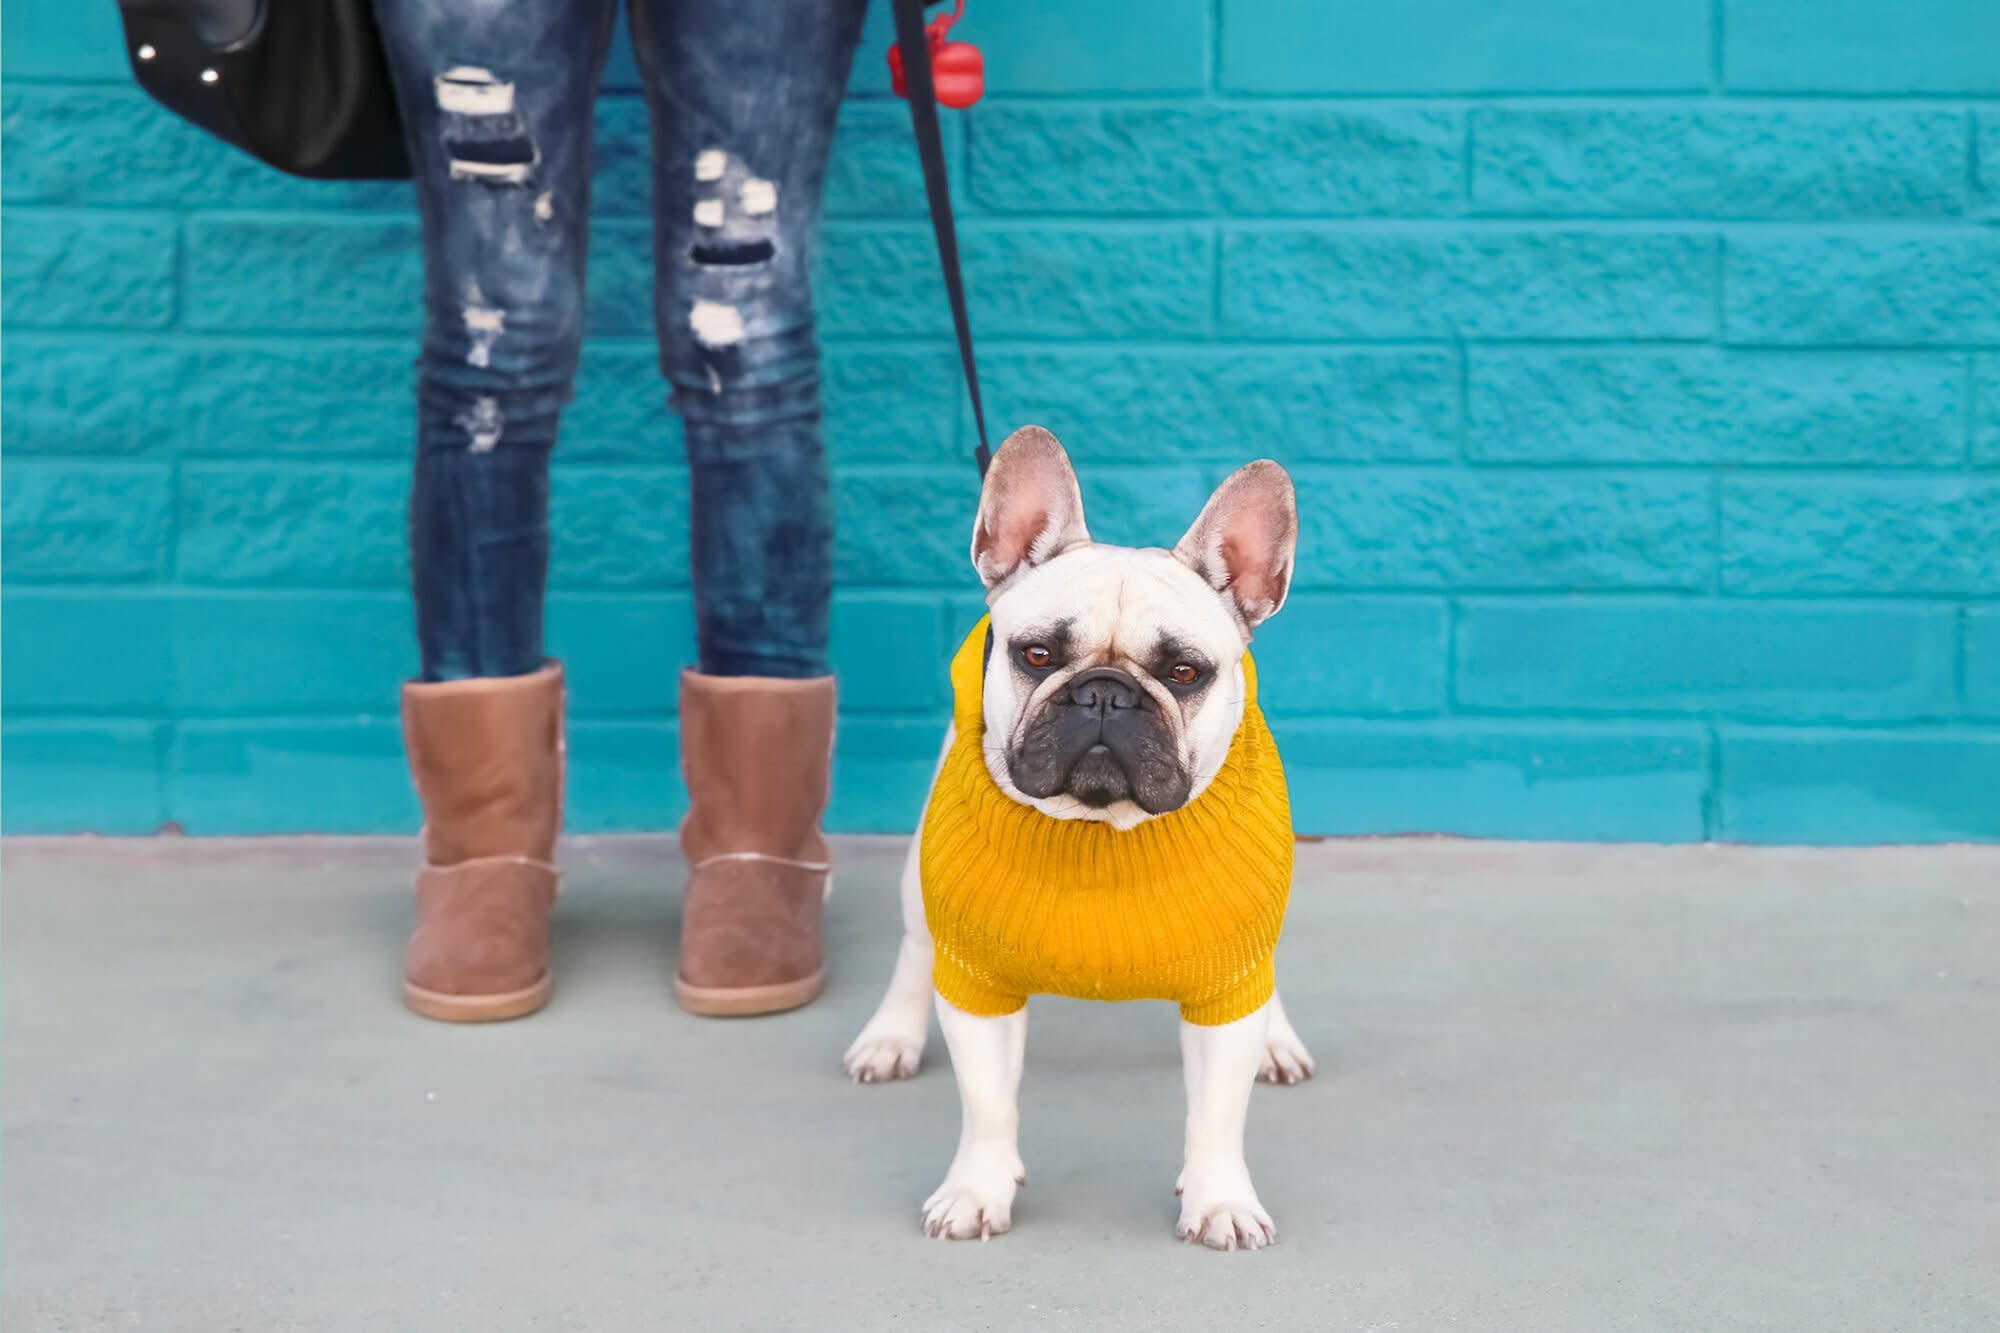 Pets on Poshmark: You Can Now Buy and Sell Pet Items on the Online Retailer